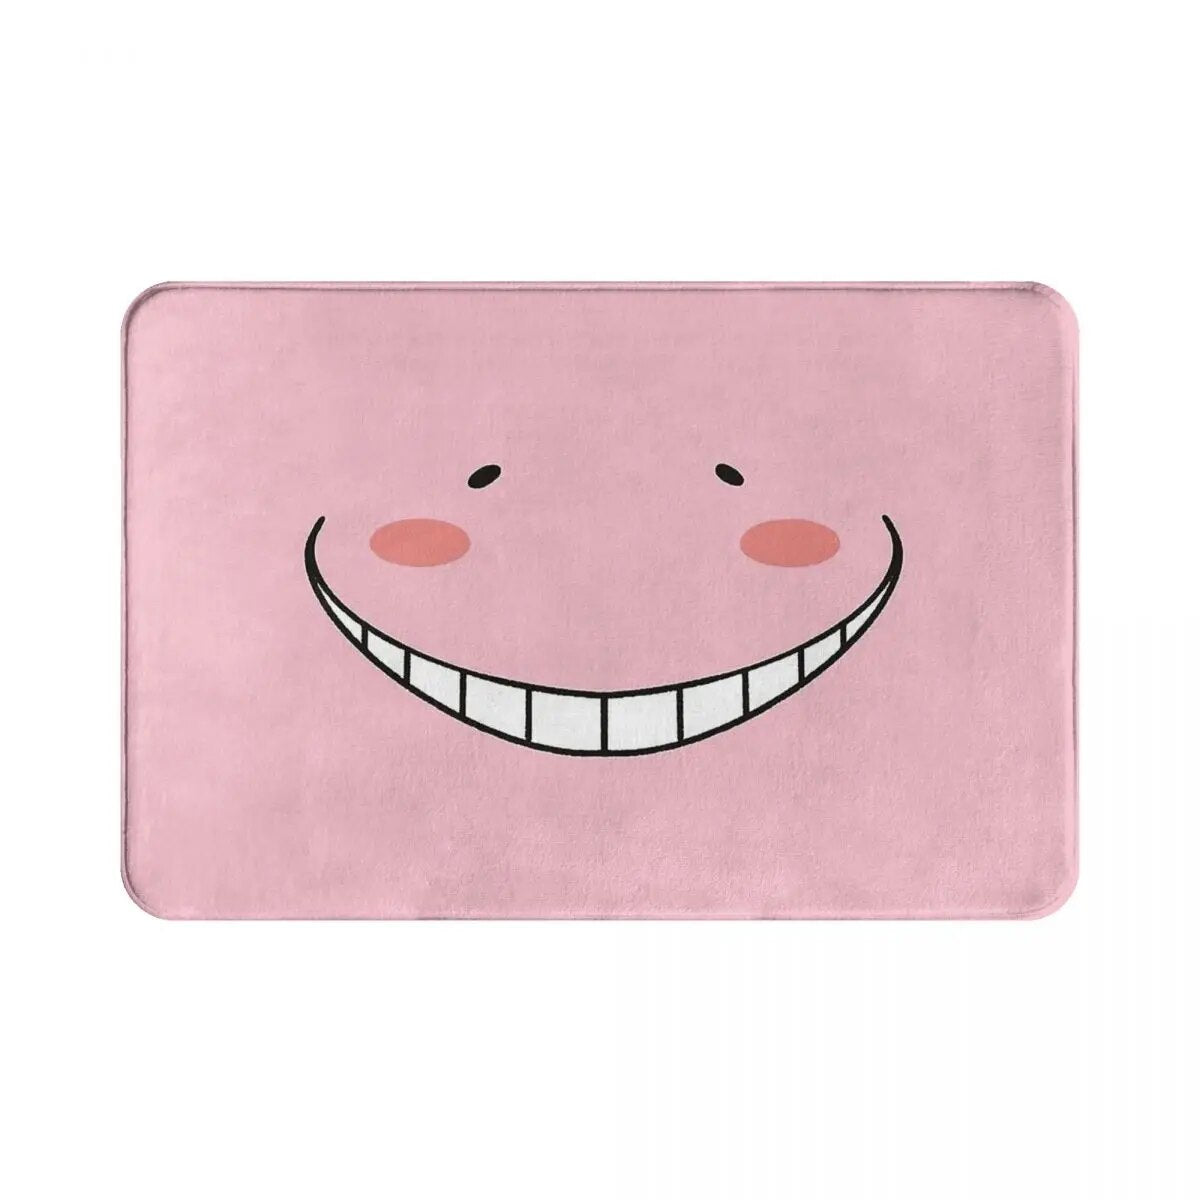 Get your very own Koro Sensei doormat now! Show of your love | If you are looking for more Assassination Classroom  Merch , We have it all! | Check out all our Anime Merch now!